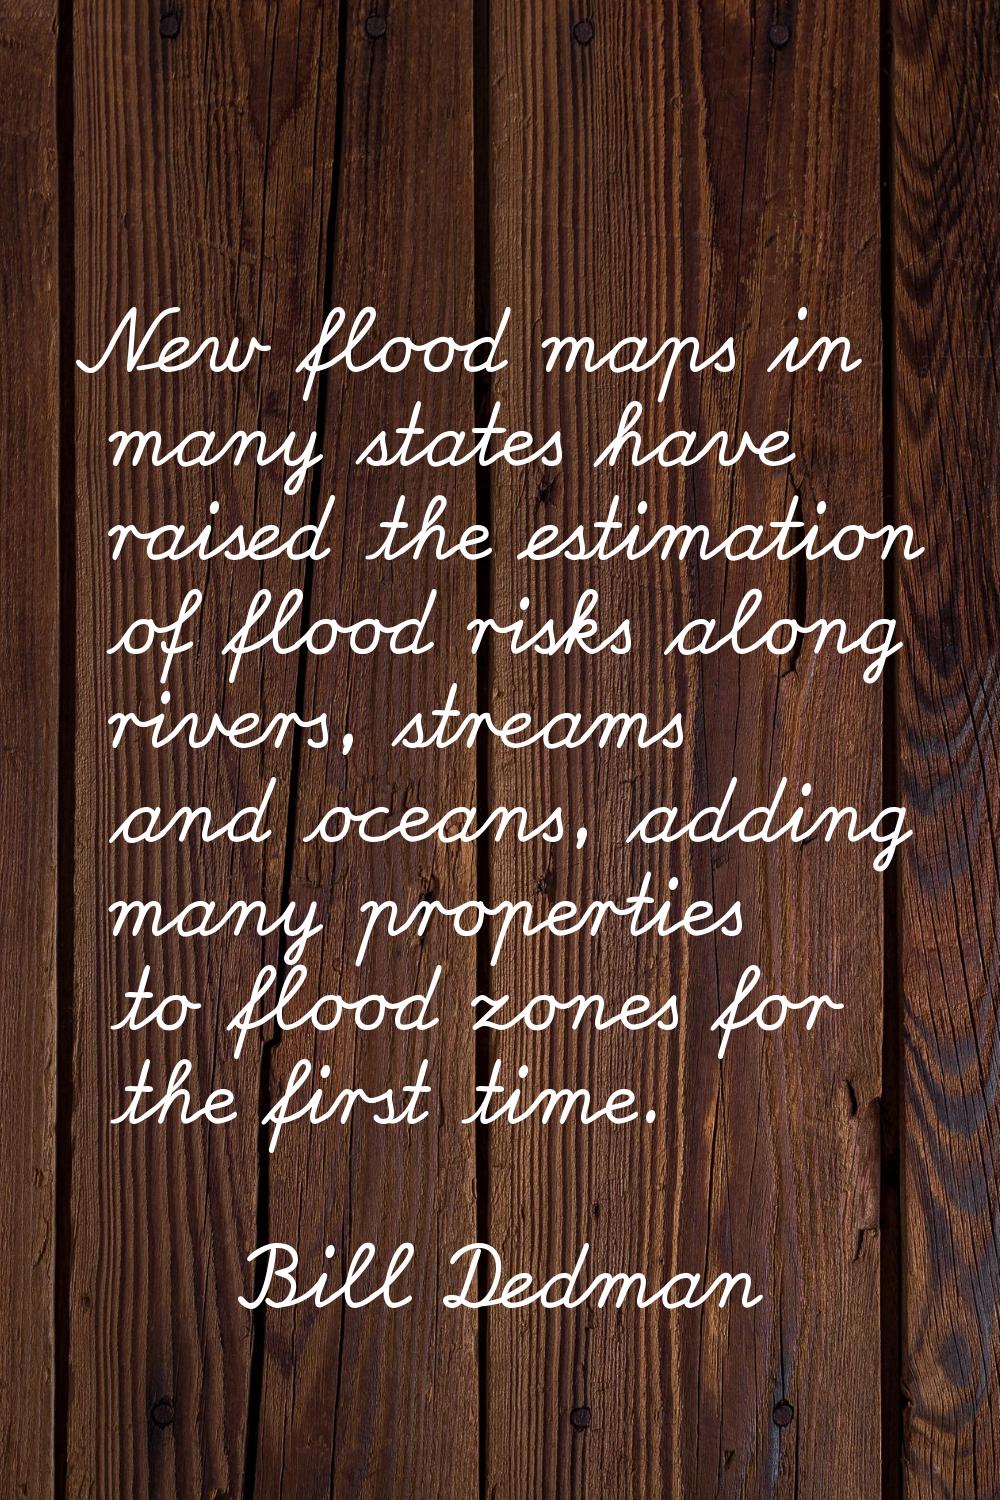 New flood maps in many states have raised the estimation of flood risks along rivers, streams and o